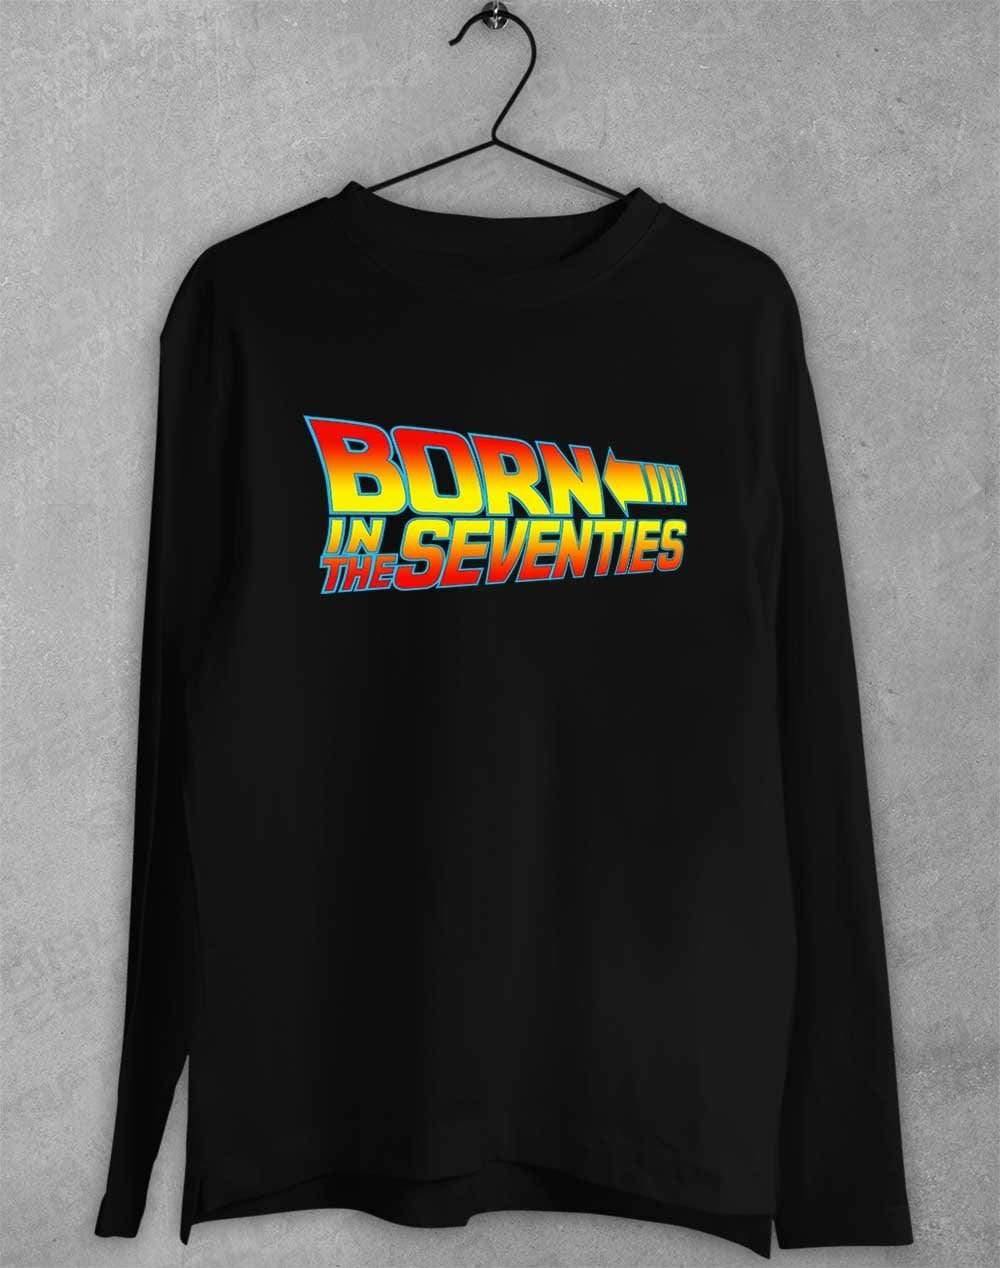 Born in the... (CHOOSE YOUR DECADE!) Long Sleeve T-Shirt 1970s - Black / S  - Off World Tees